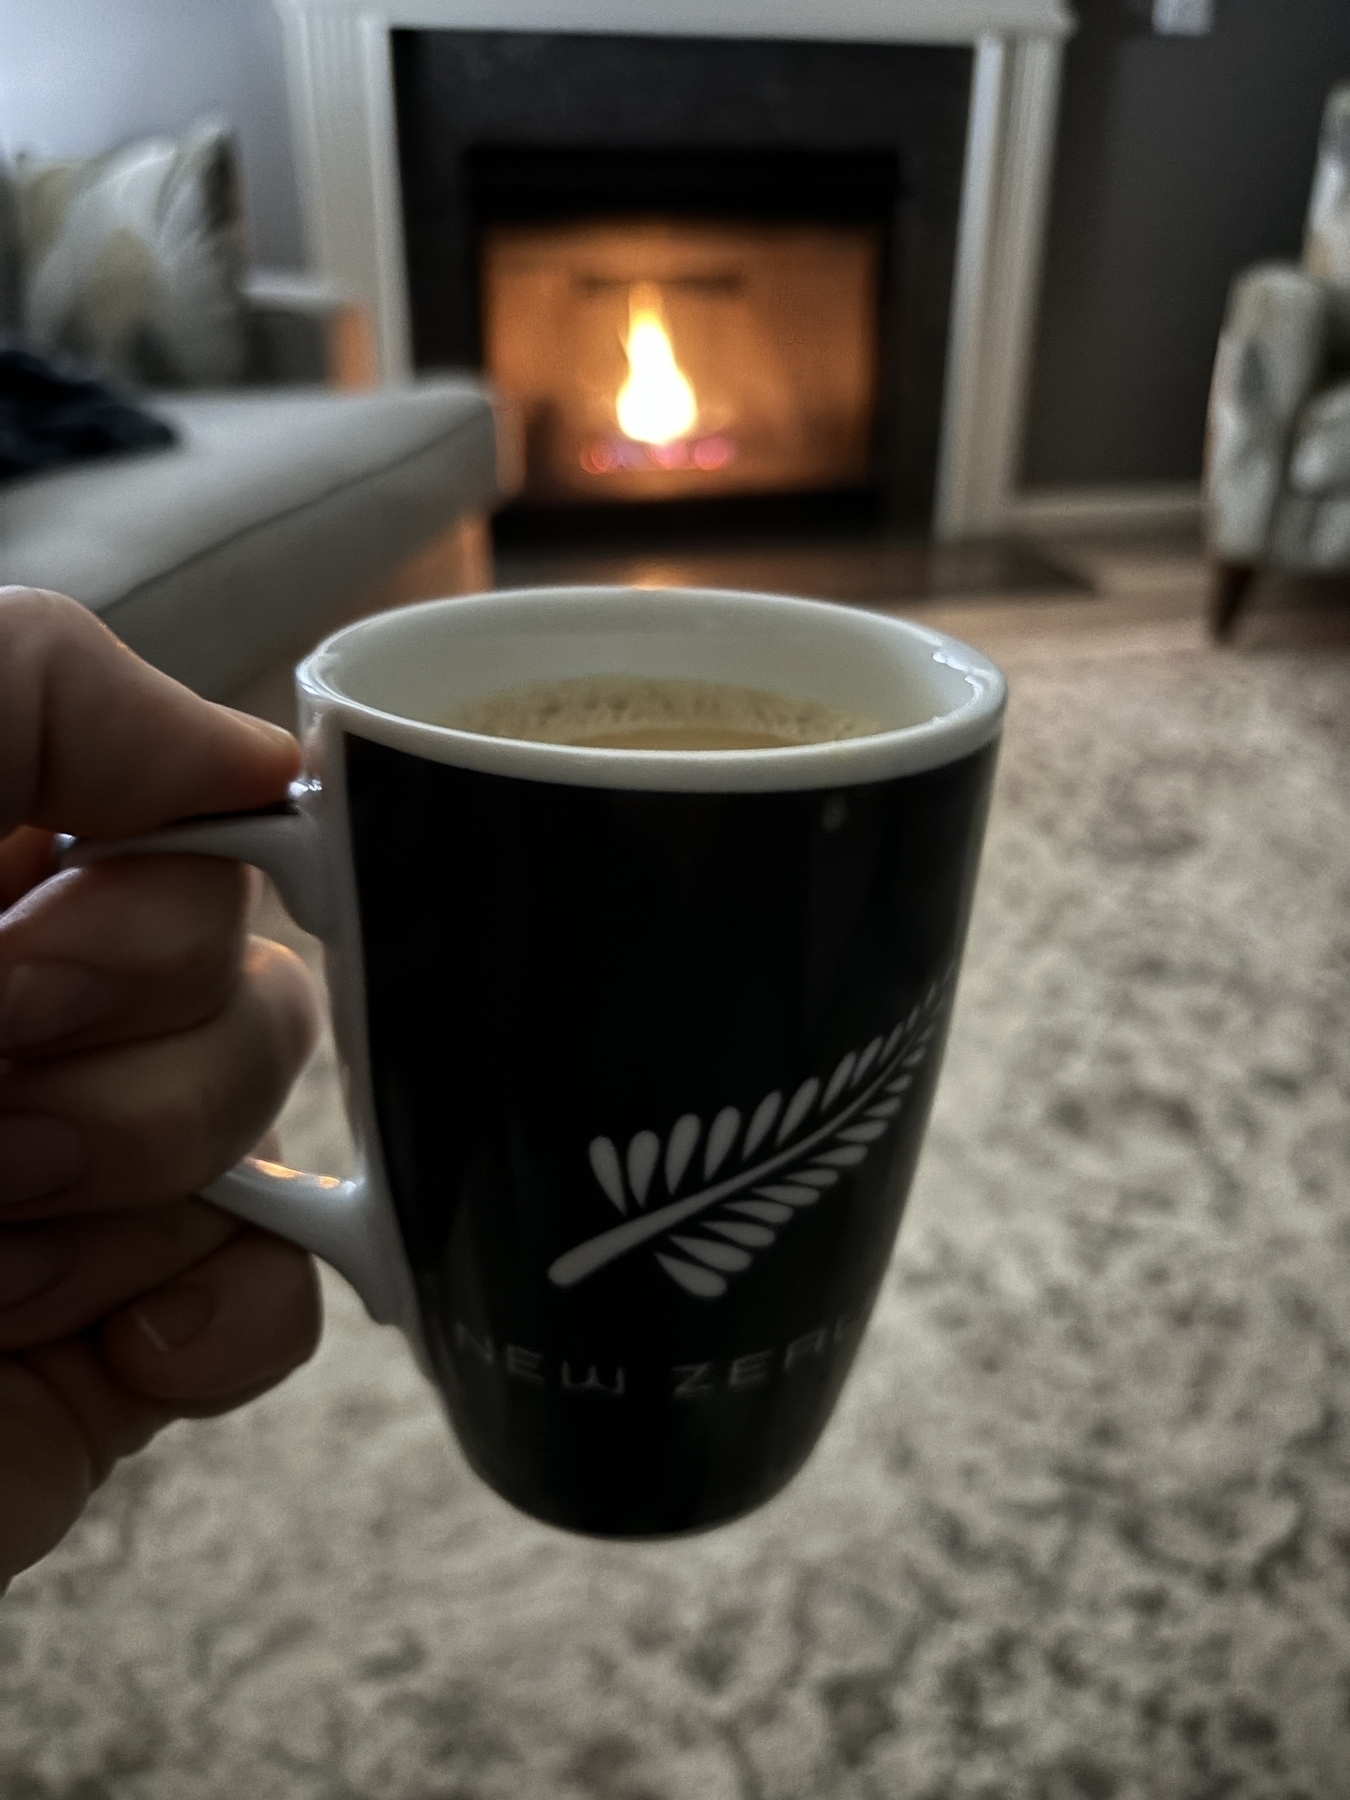 An All Blacks mug in front of a fireplace. 